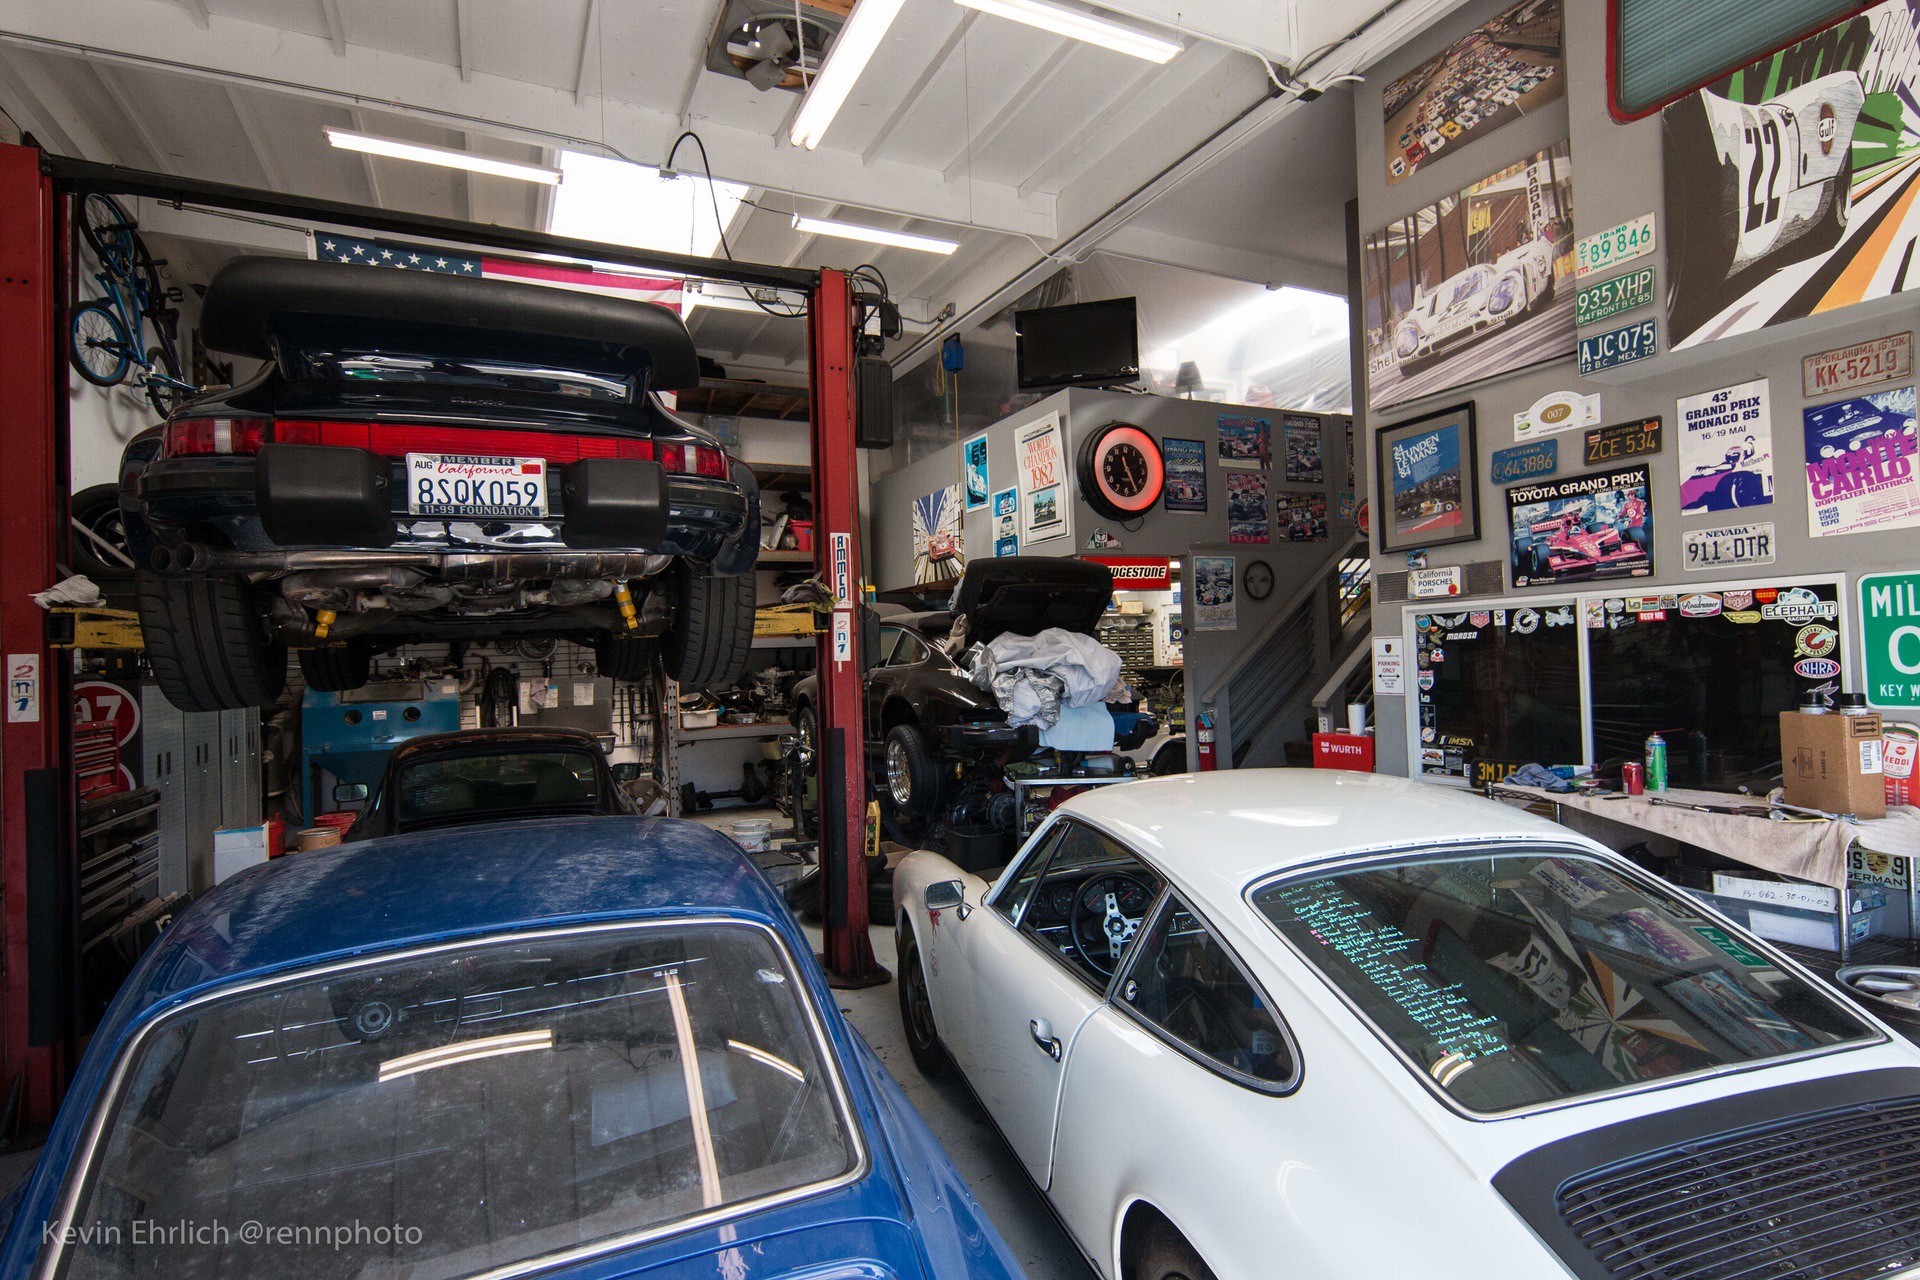 Cars in workshop at California Porsches during 2022 Lit Show weekend in LA